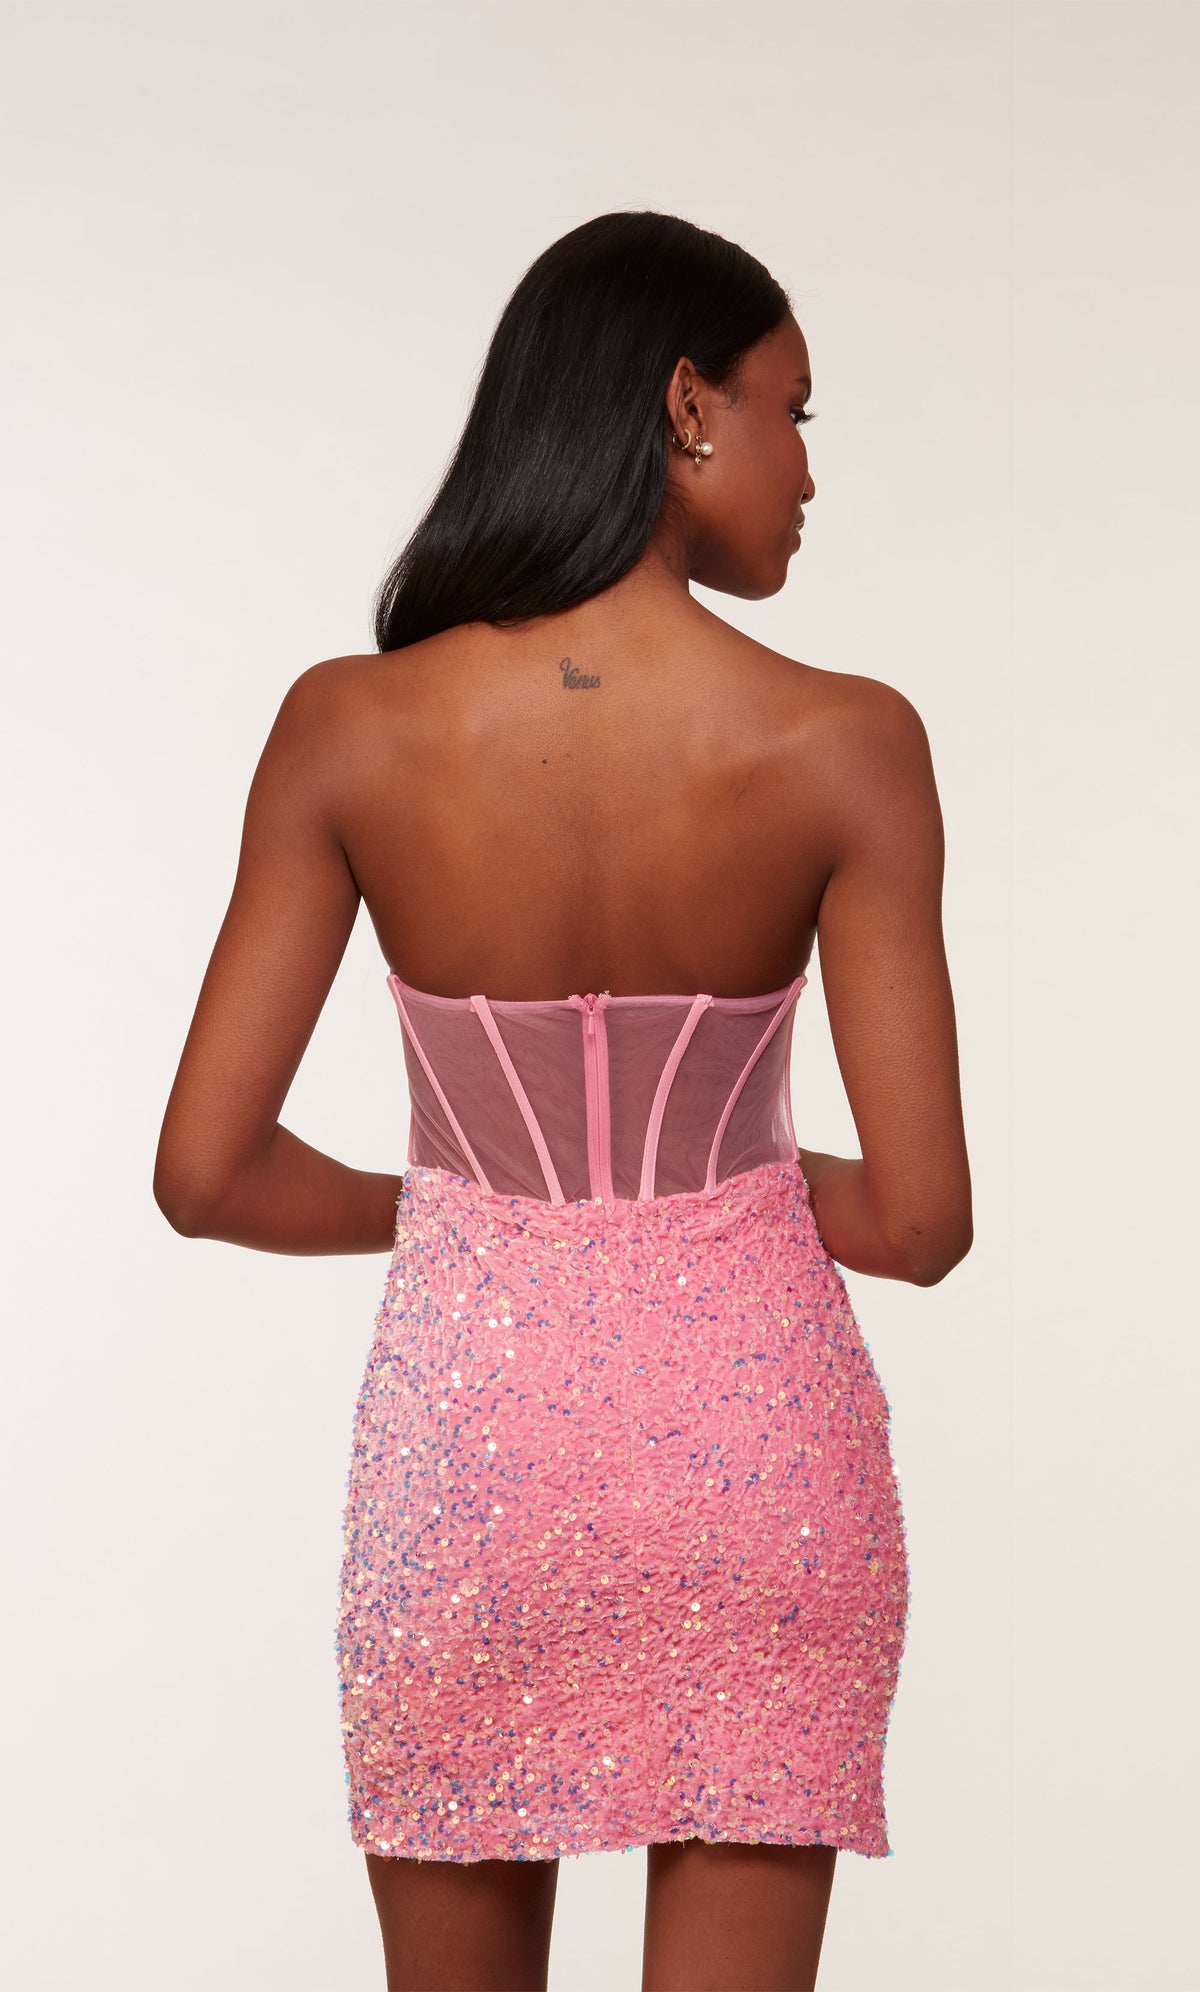 A glamorous corset top dress featuring a strapless zip-up back and sheer bodice, in bubblegum pink colored plush sequins.